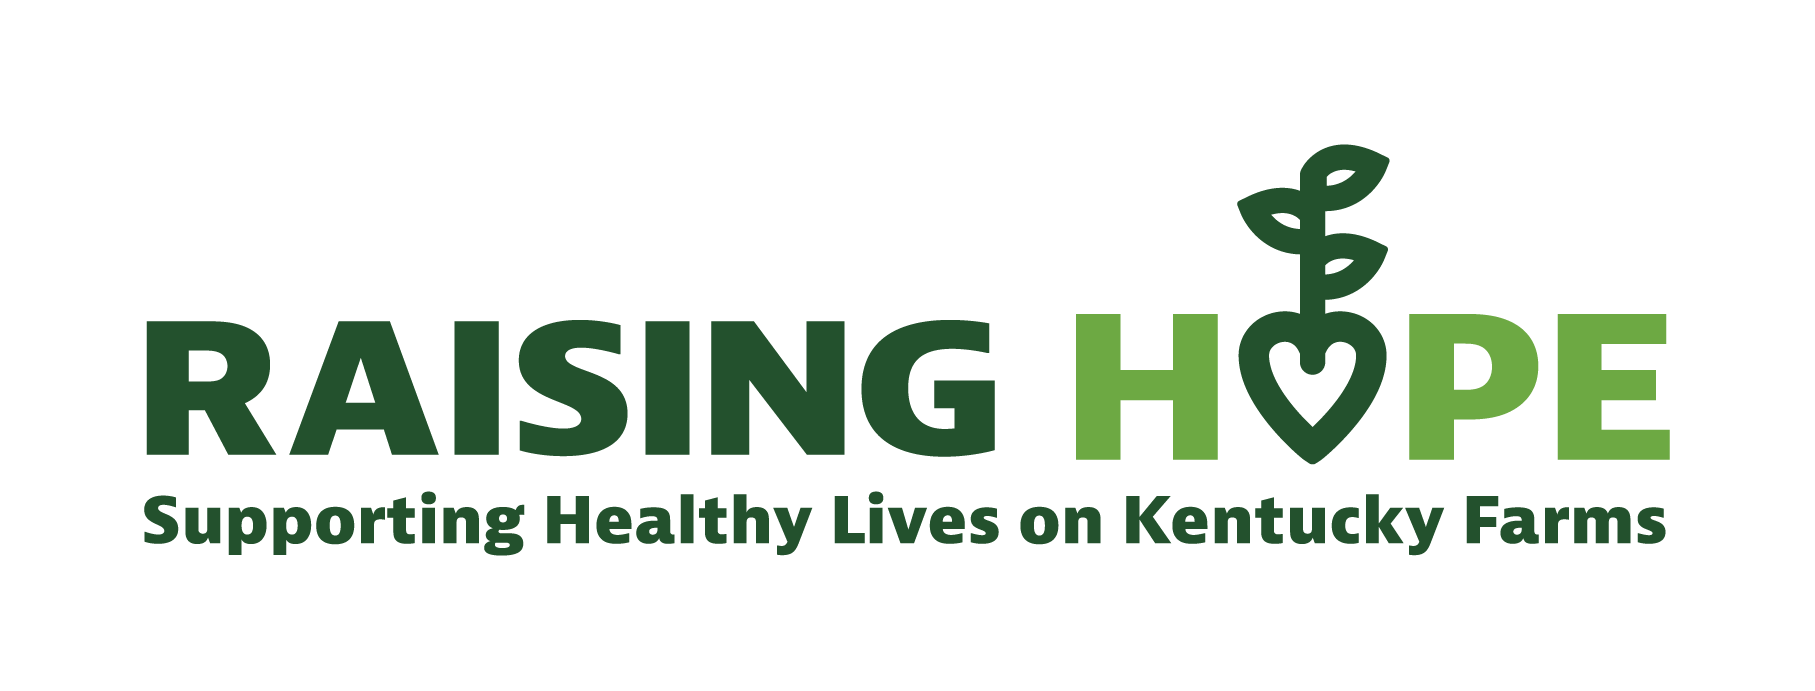 the Raising Hope logo. Underneath the Raising Hope it says, "Supporting Healthy Lives on Kentucky Farms."